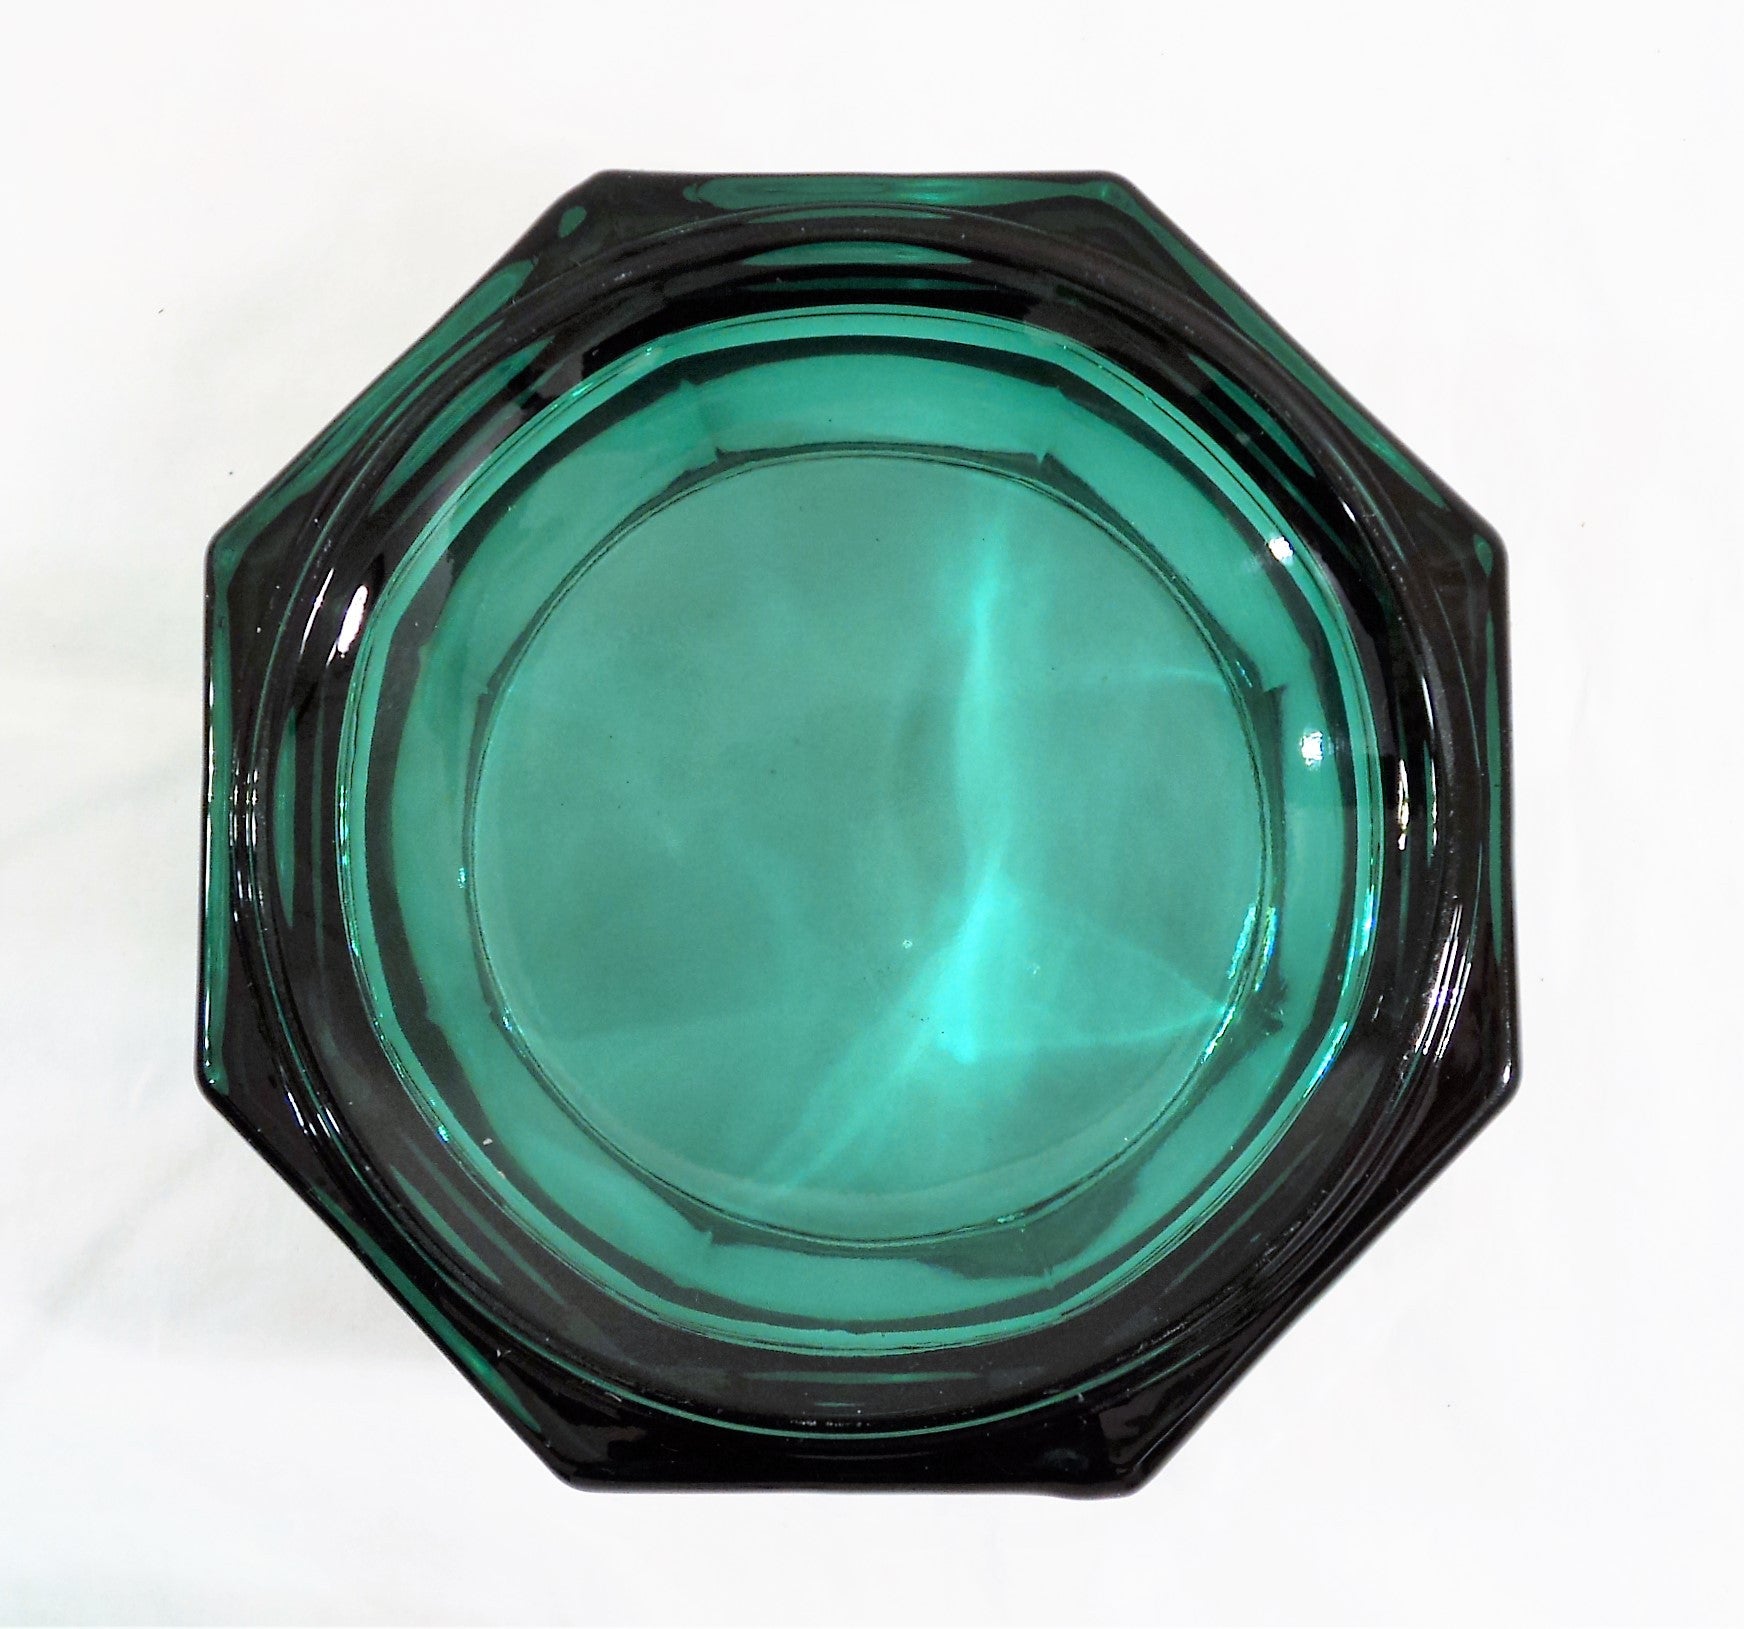 Hexagonal Teal Glass Covered Candy Dish